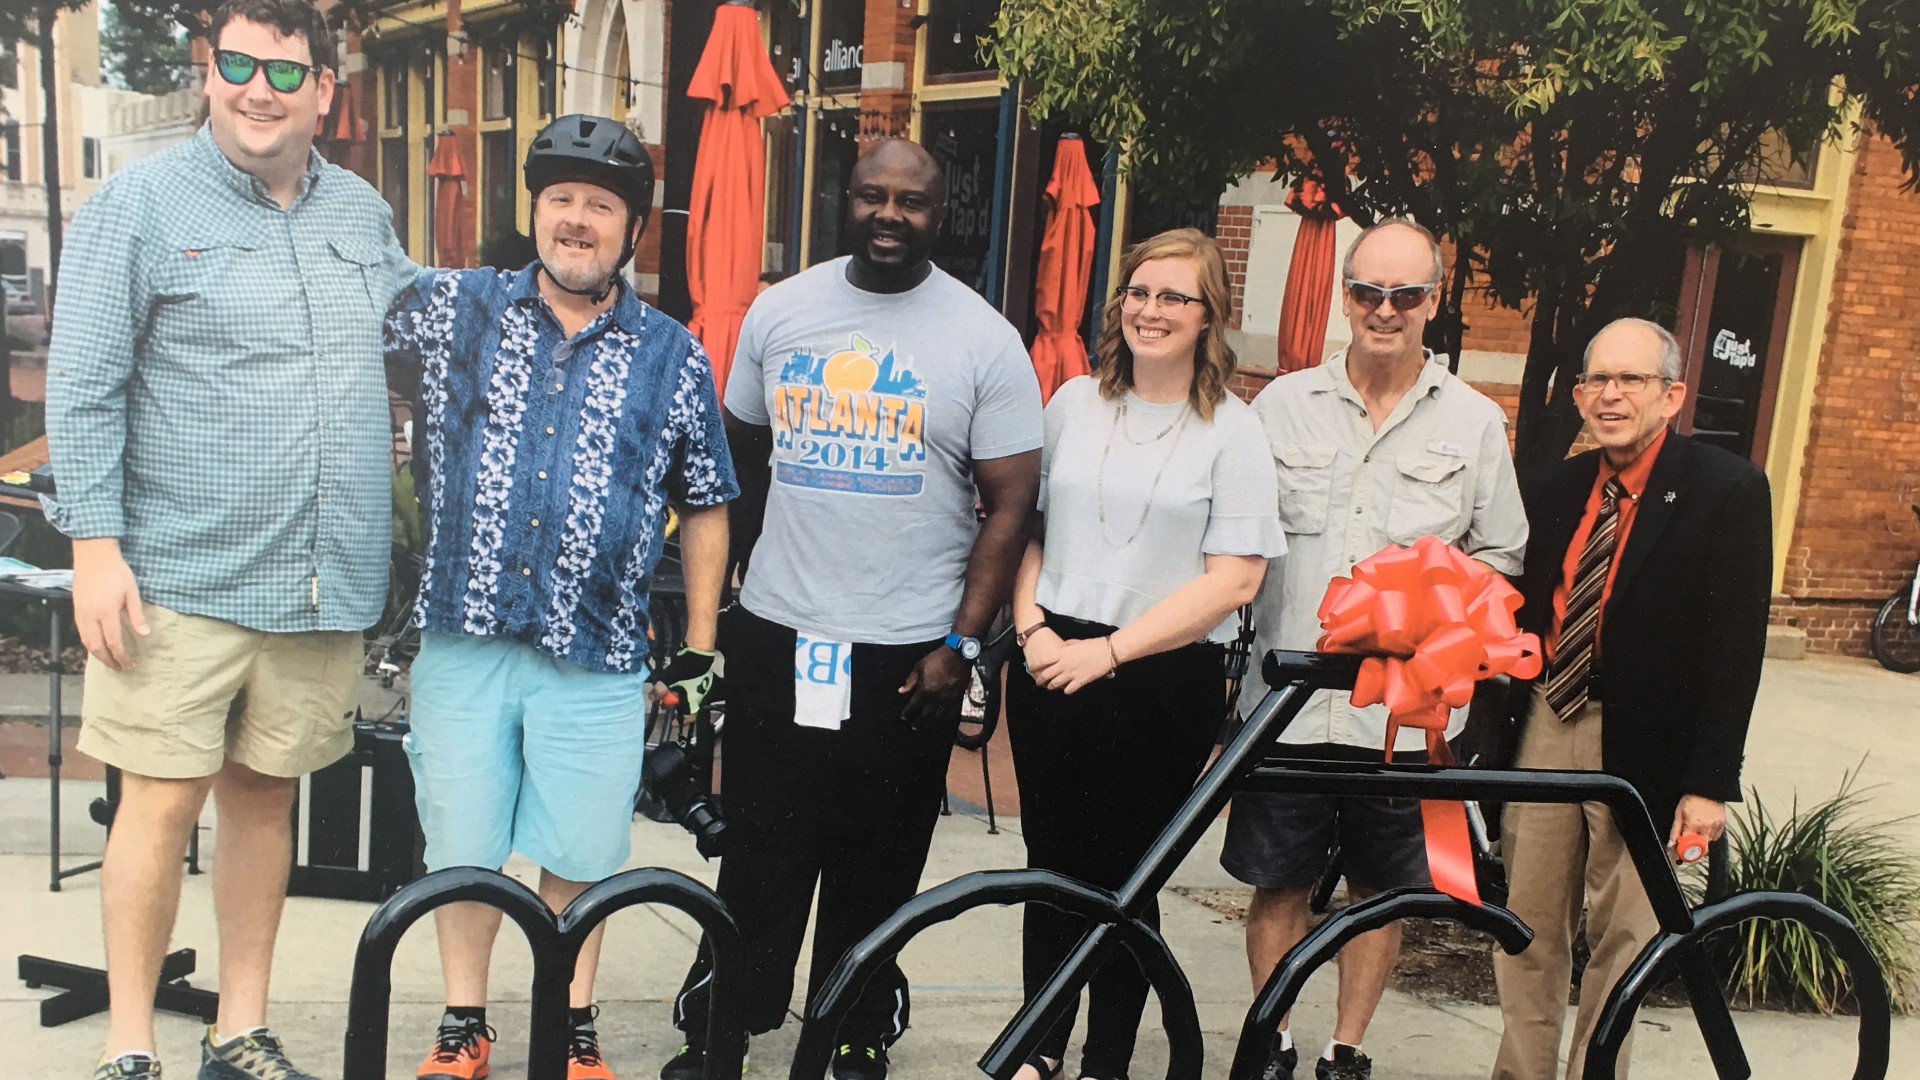 The organization seeks to make Macon's streets more pedestrian friendly while providing resources for people curious about biking